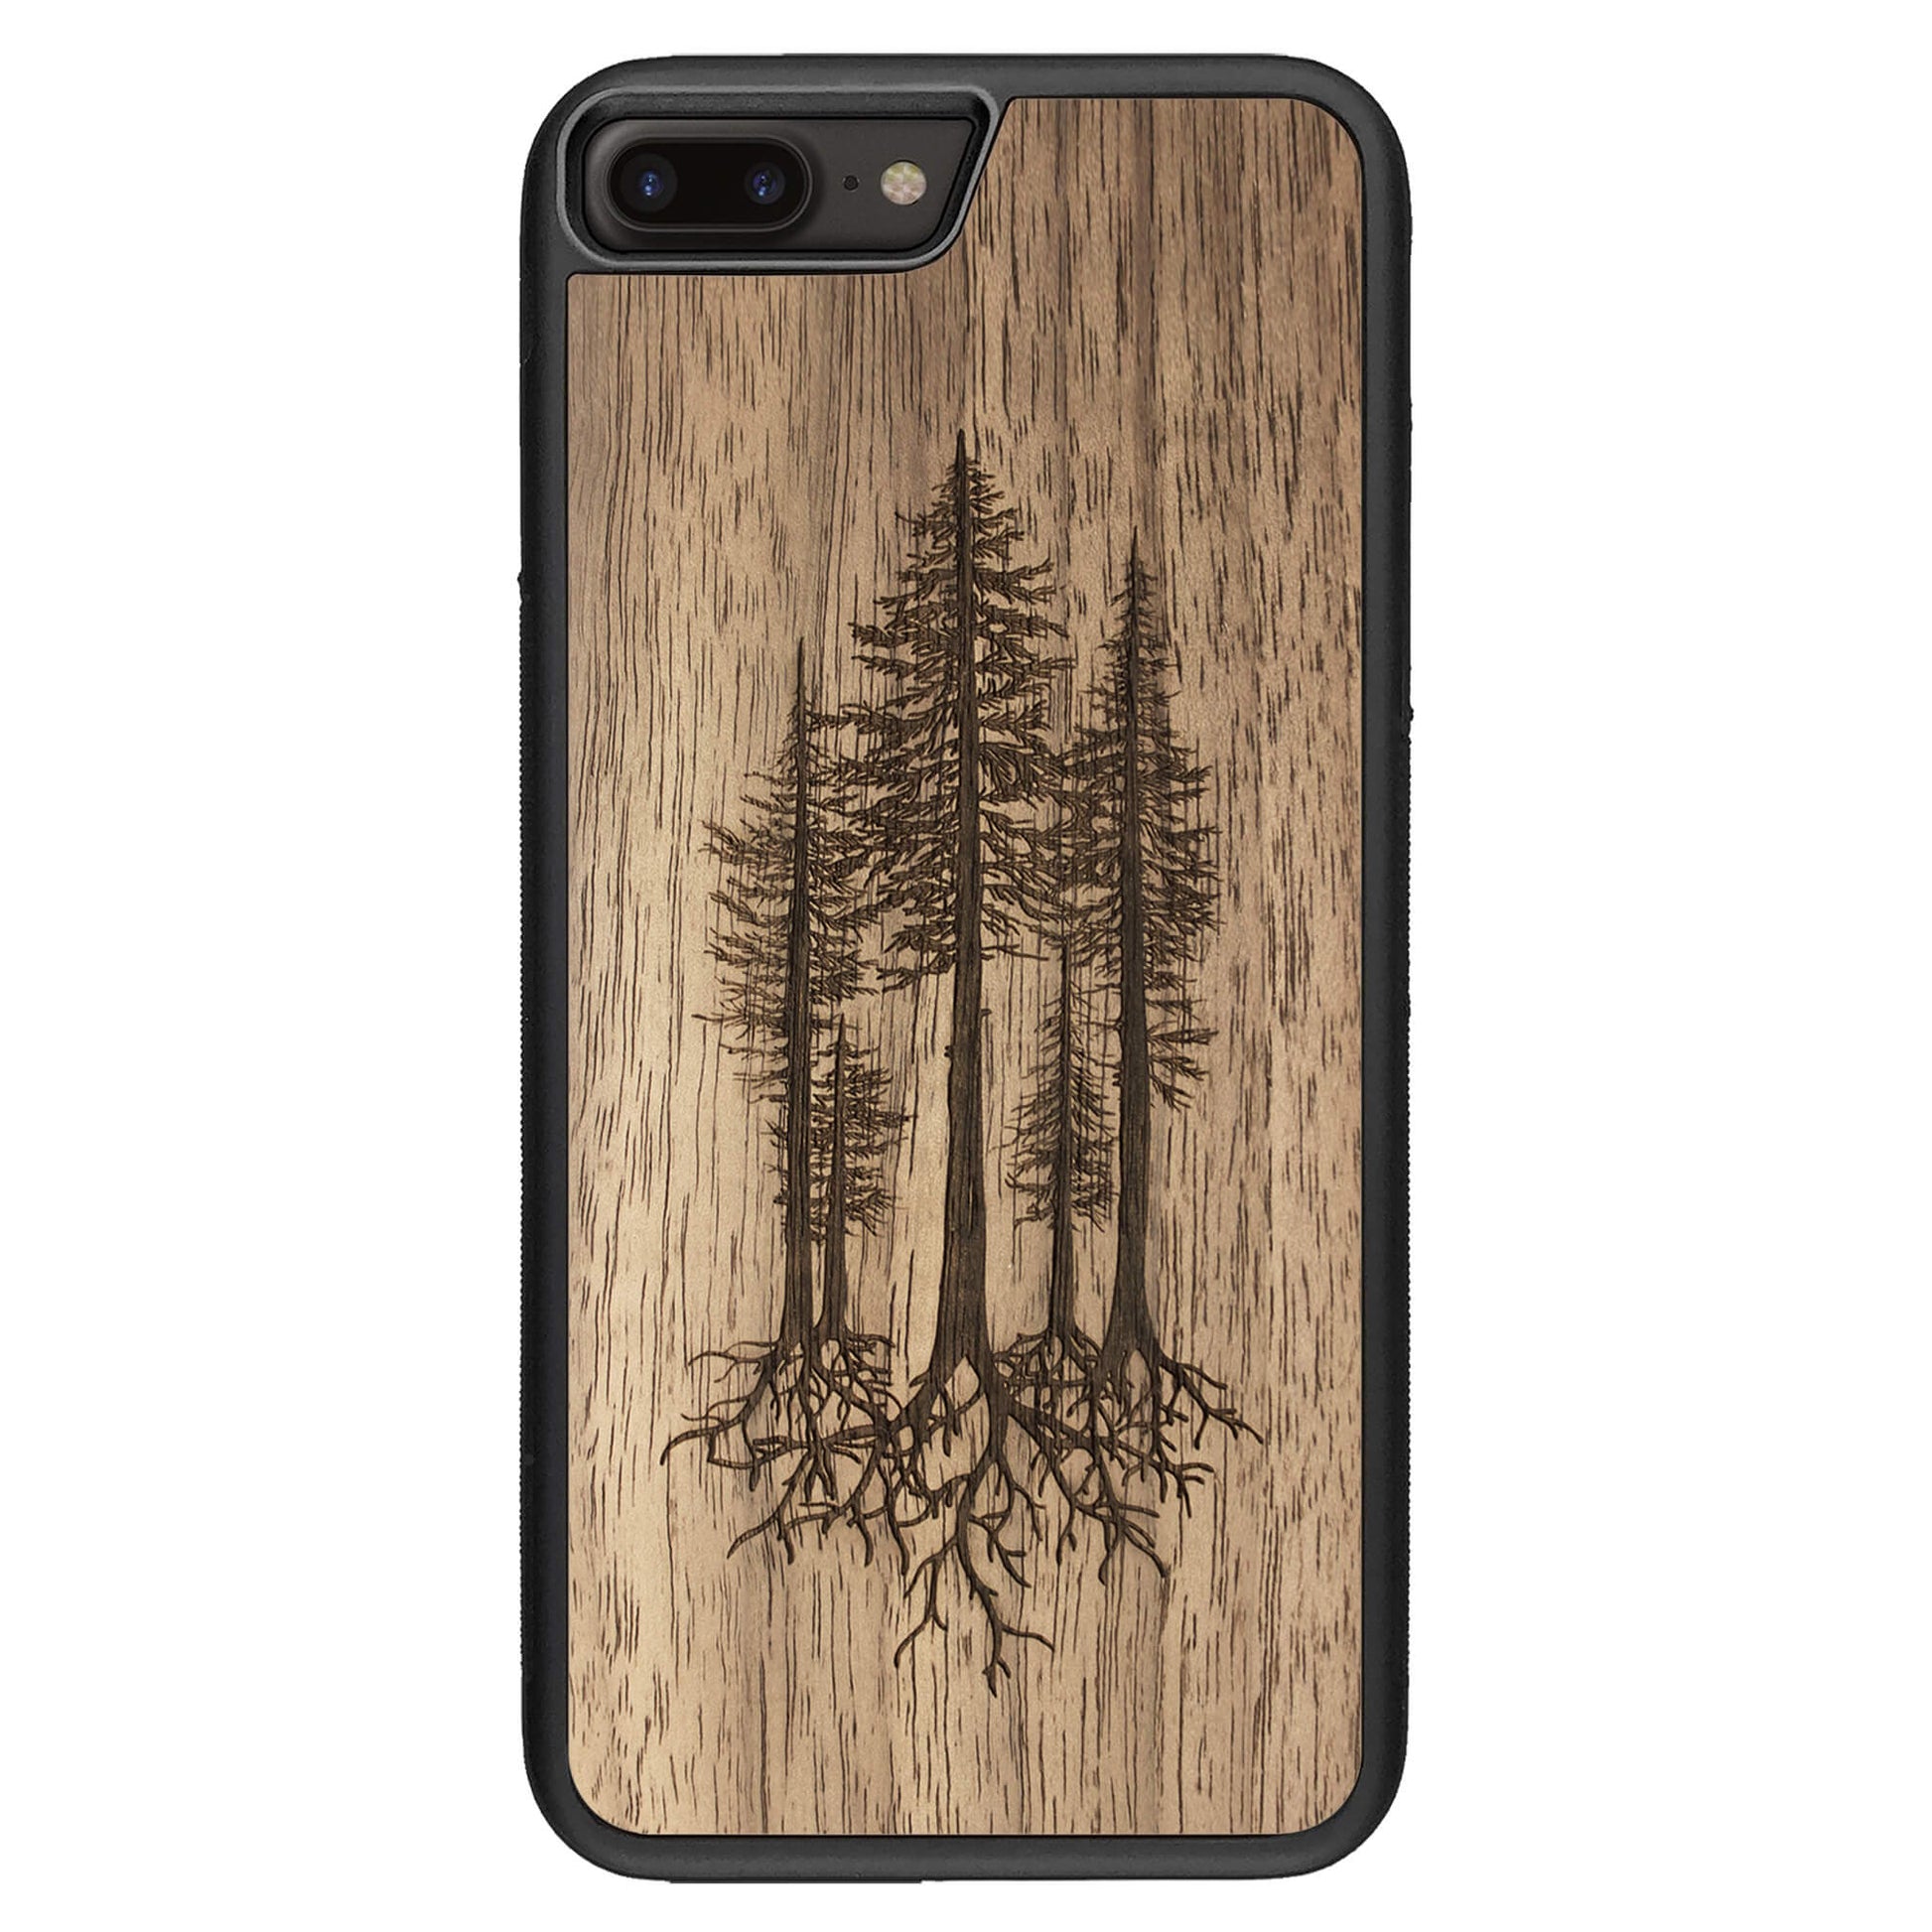 Wooden Case for iPhone 7 Plus Pines